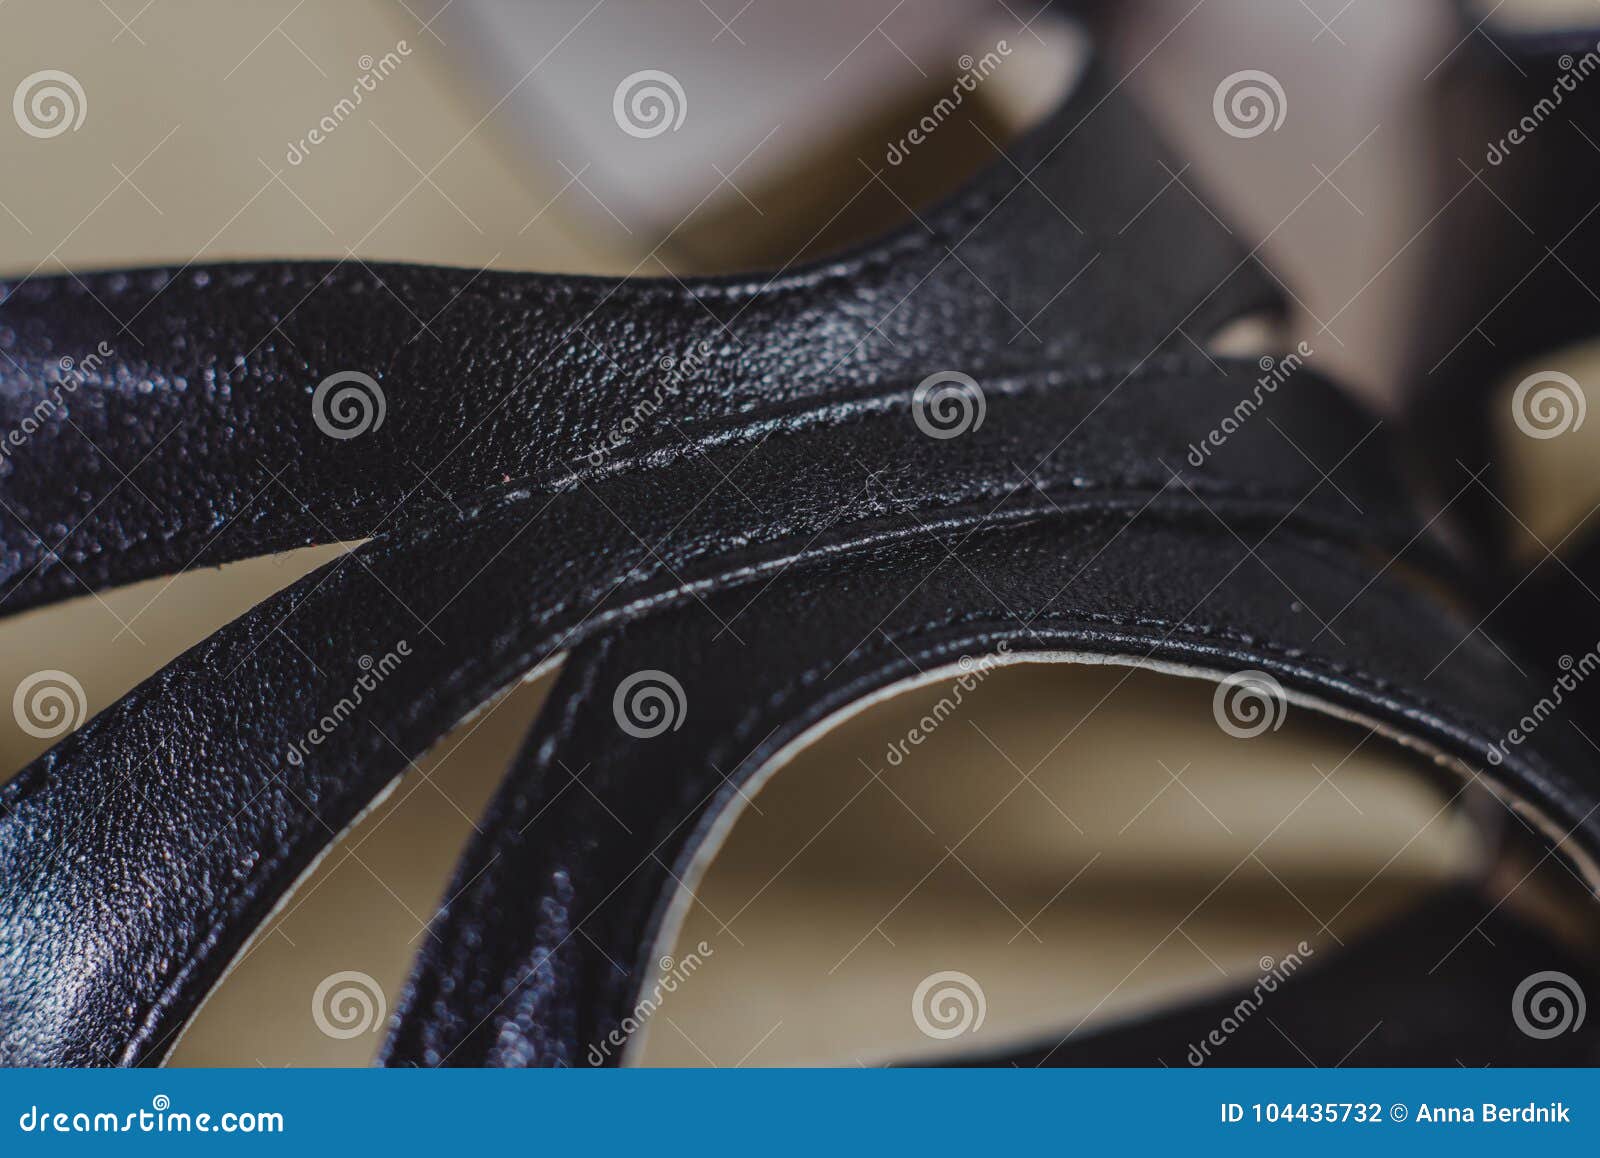 Hand-made Womens Dance Shoes Made of Genuine Leather on the Wooden ...